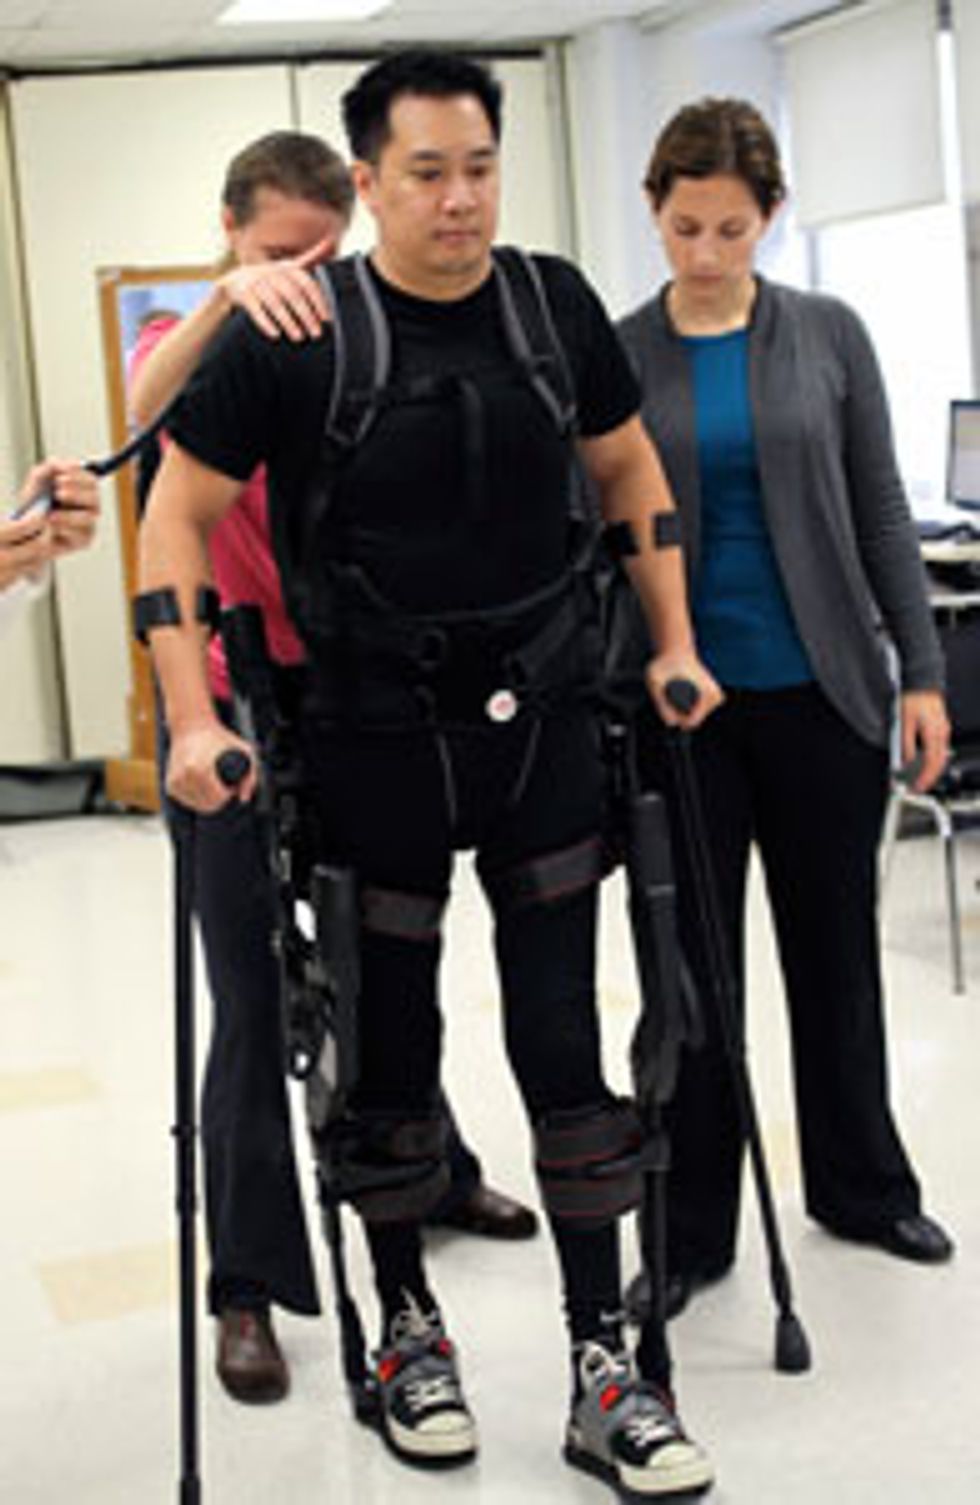 Stepping Out At Mount Sinai Hospital, in New York City, Robert Woo uses the Ekso to walk again.